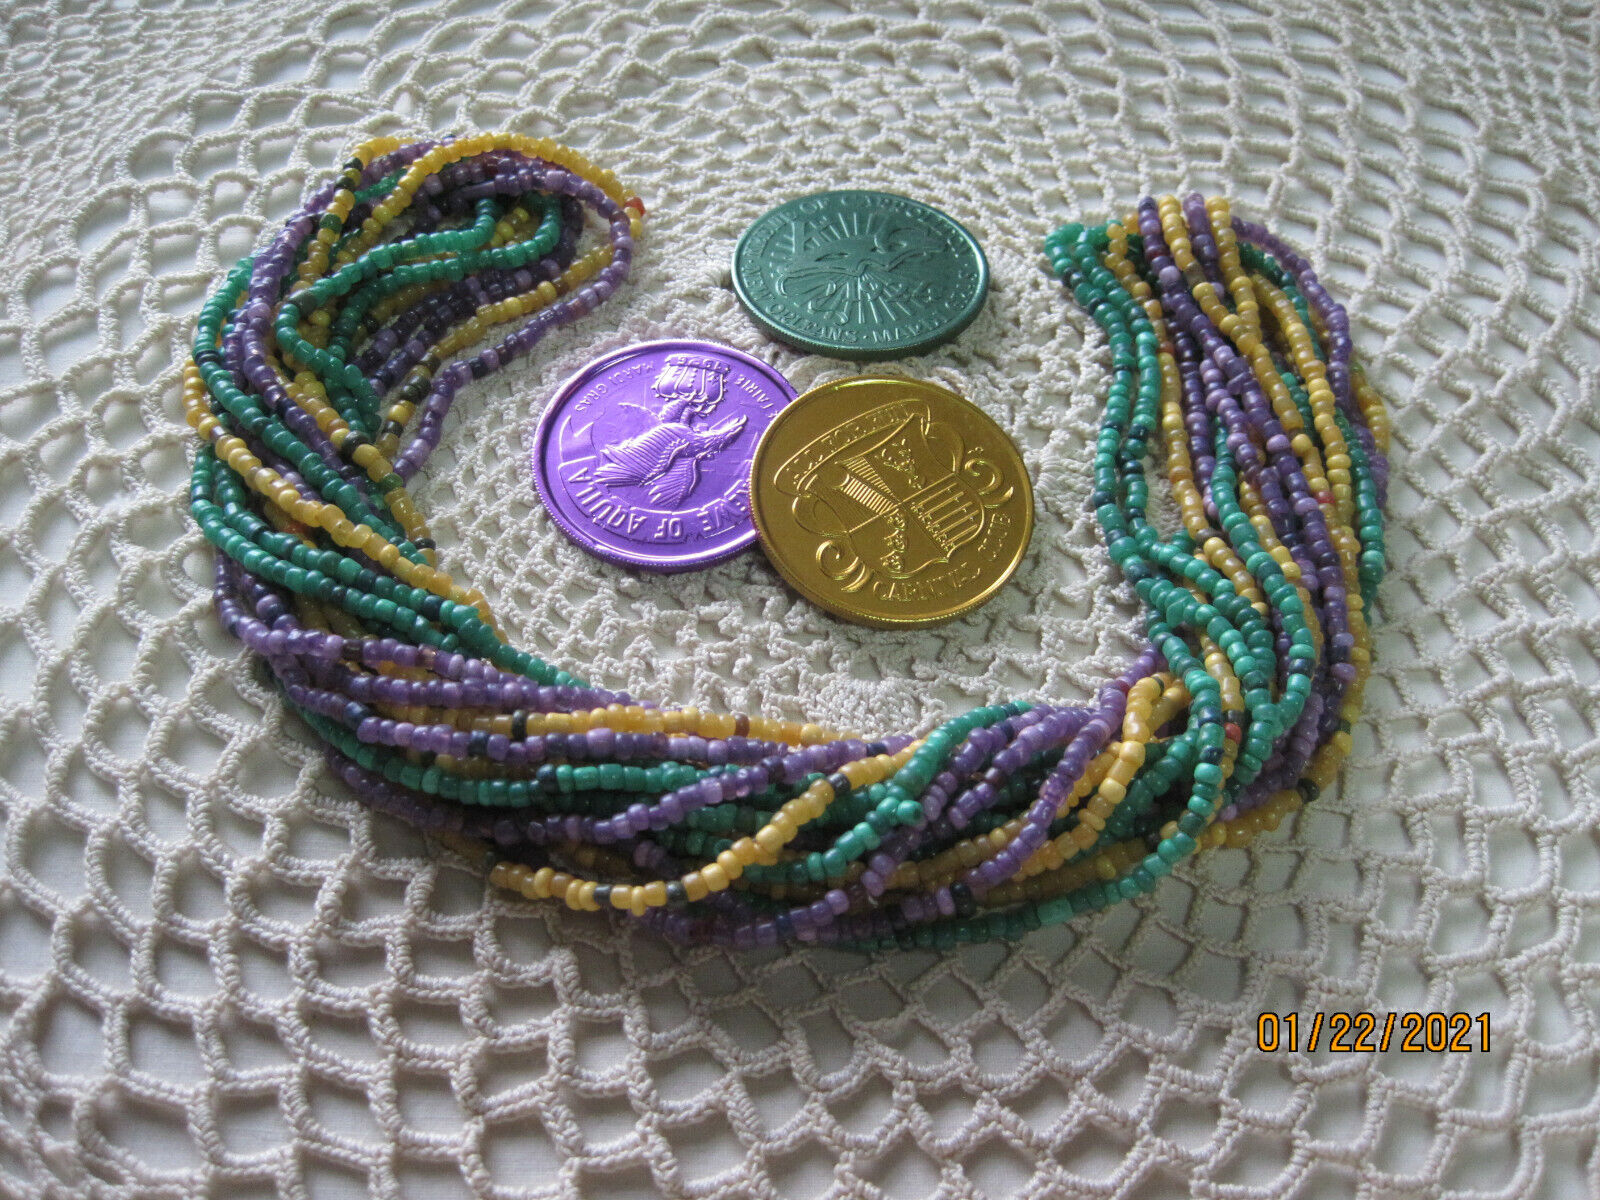 #107-From a New Orleans Mardi Gras Parade-Glass Carnival Beads & Doubloons